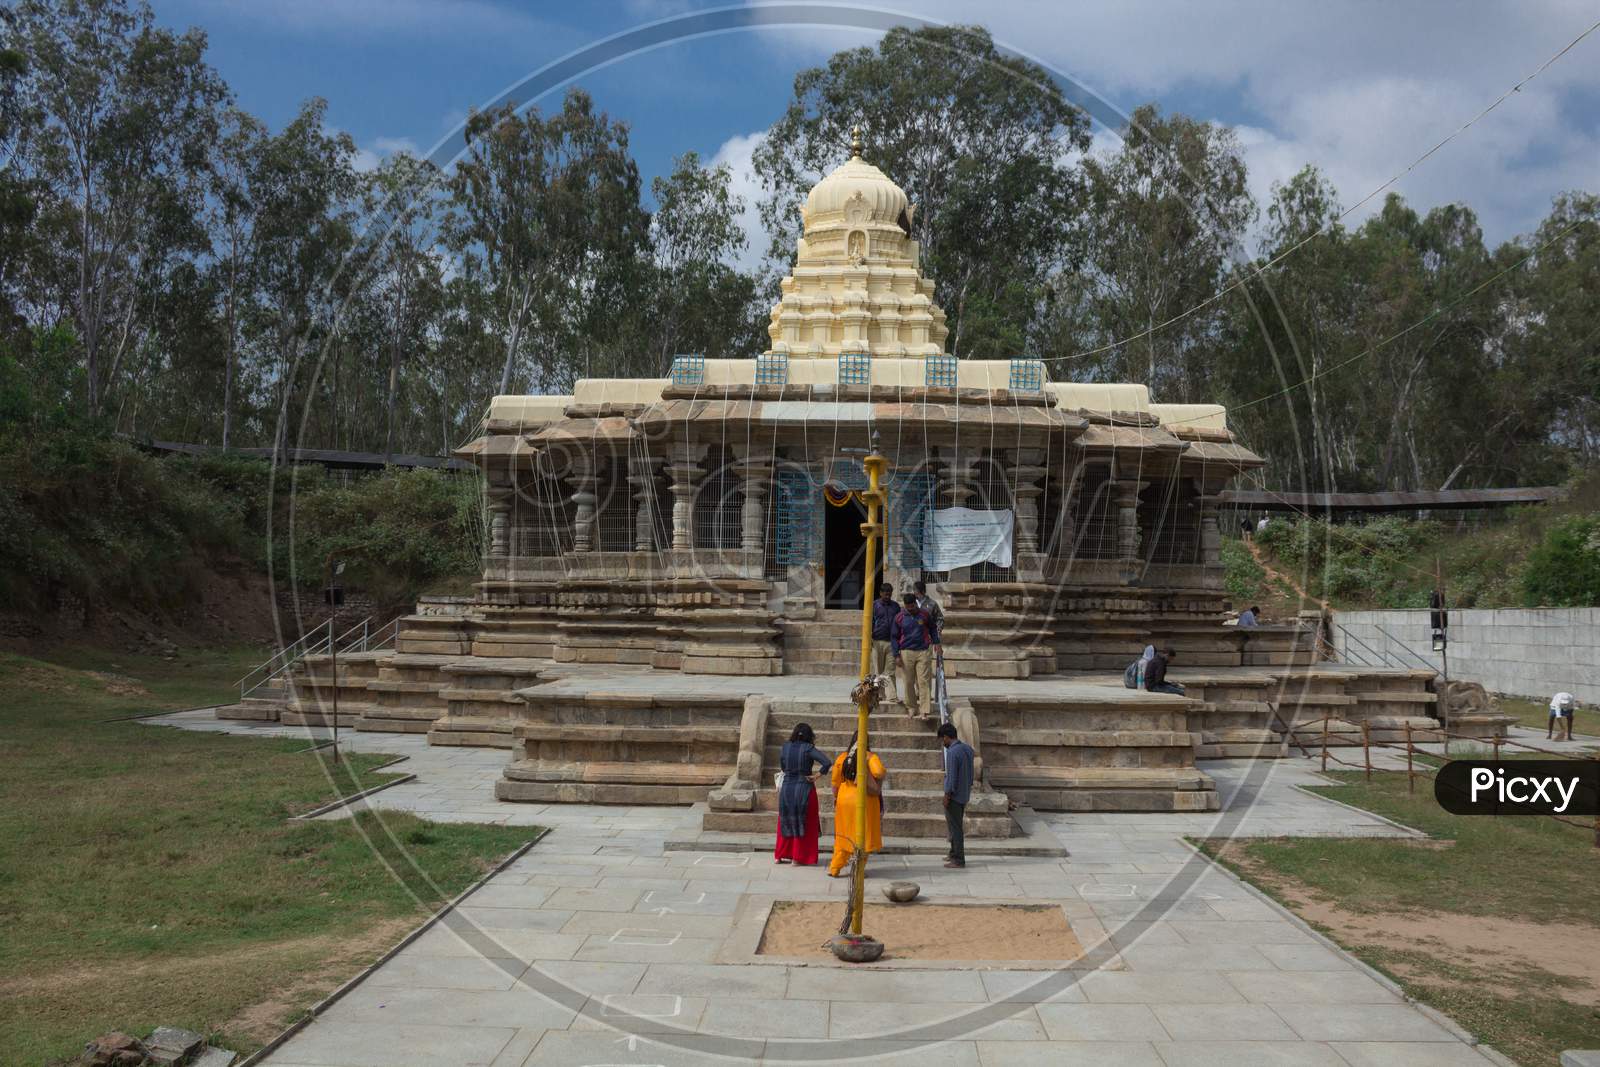 A Beautiful front view of the ancient Hindu Stone temple dedicated to lord Shiva with the pilgrims in Talakadu town which re opened after the Covid 19 lock down near Mysuru,India.